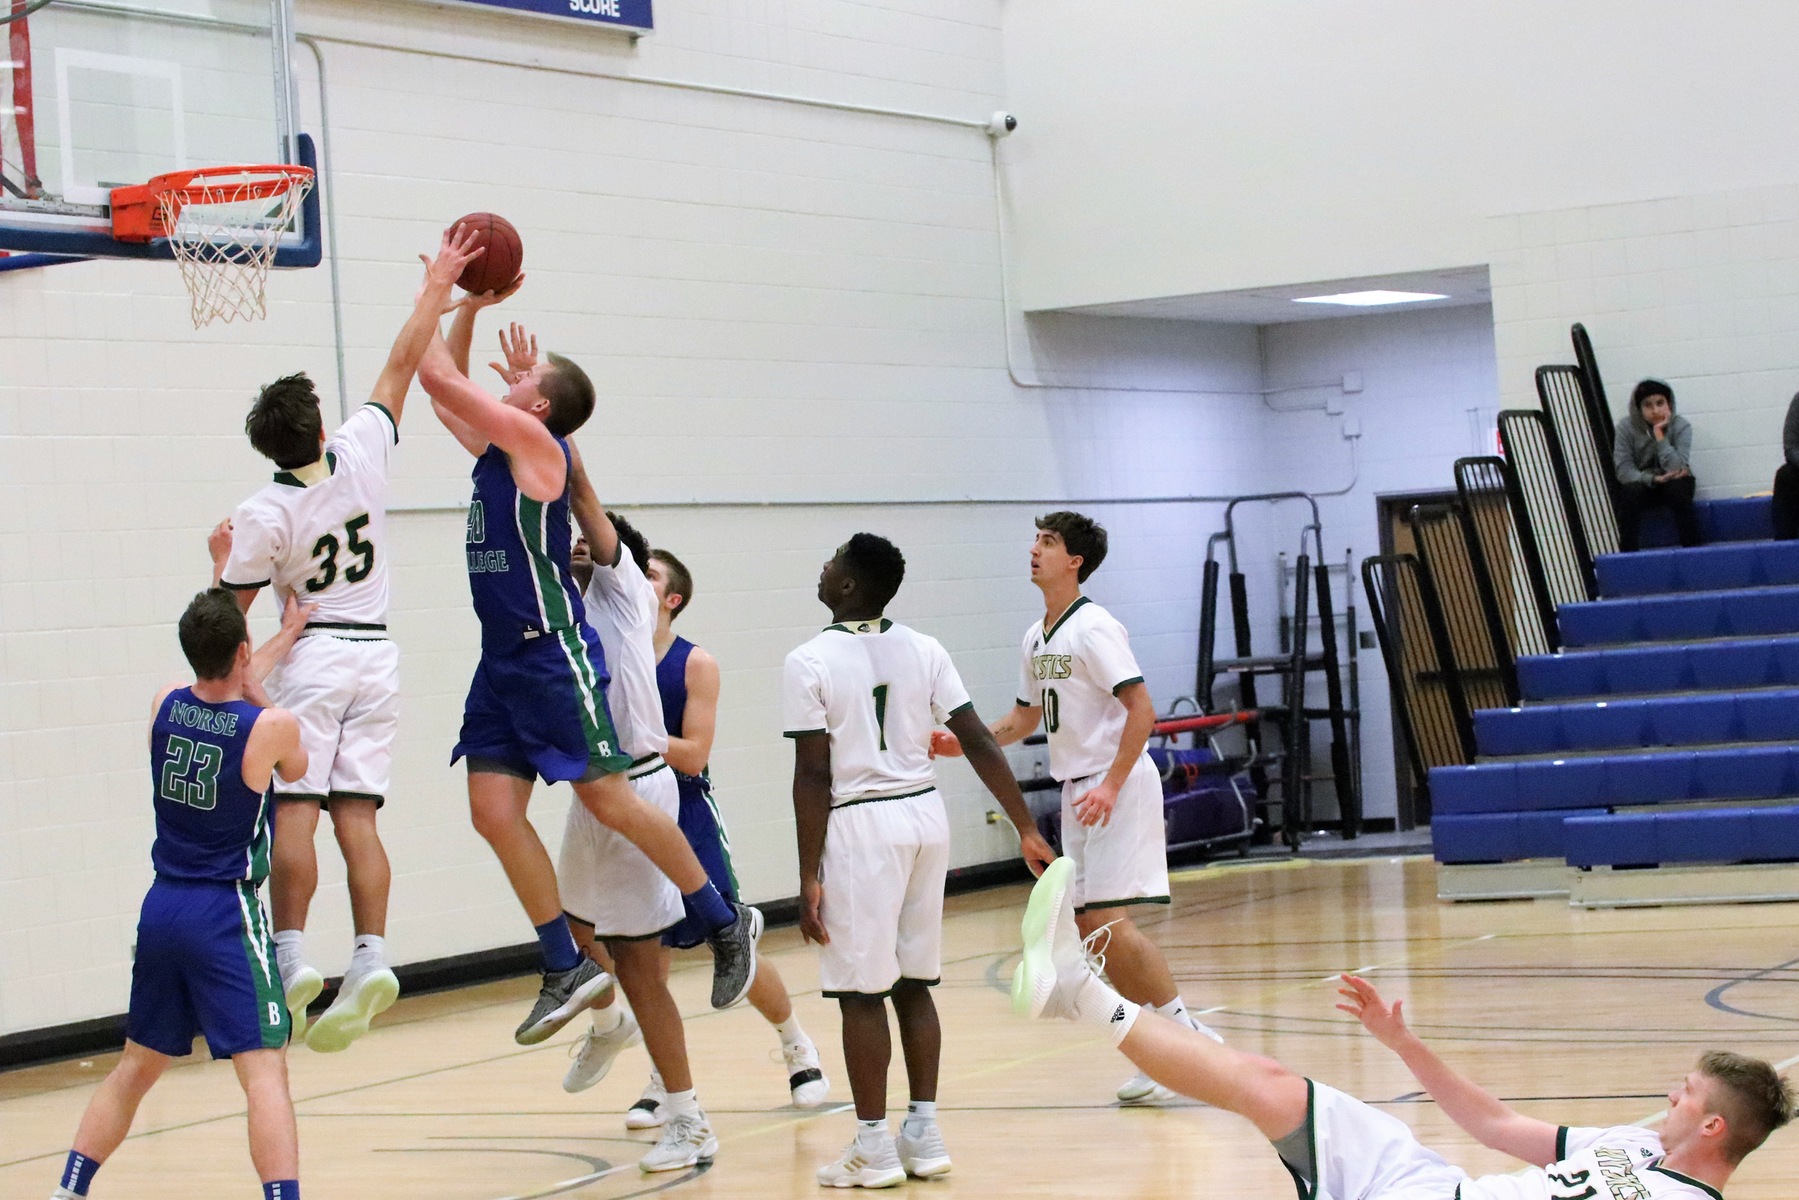 Logan Hardwick in mid air about to shoot near the basket.  Two defenders are closely defending him, one with an arm extended toward the ball.  